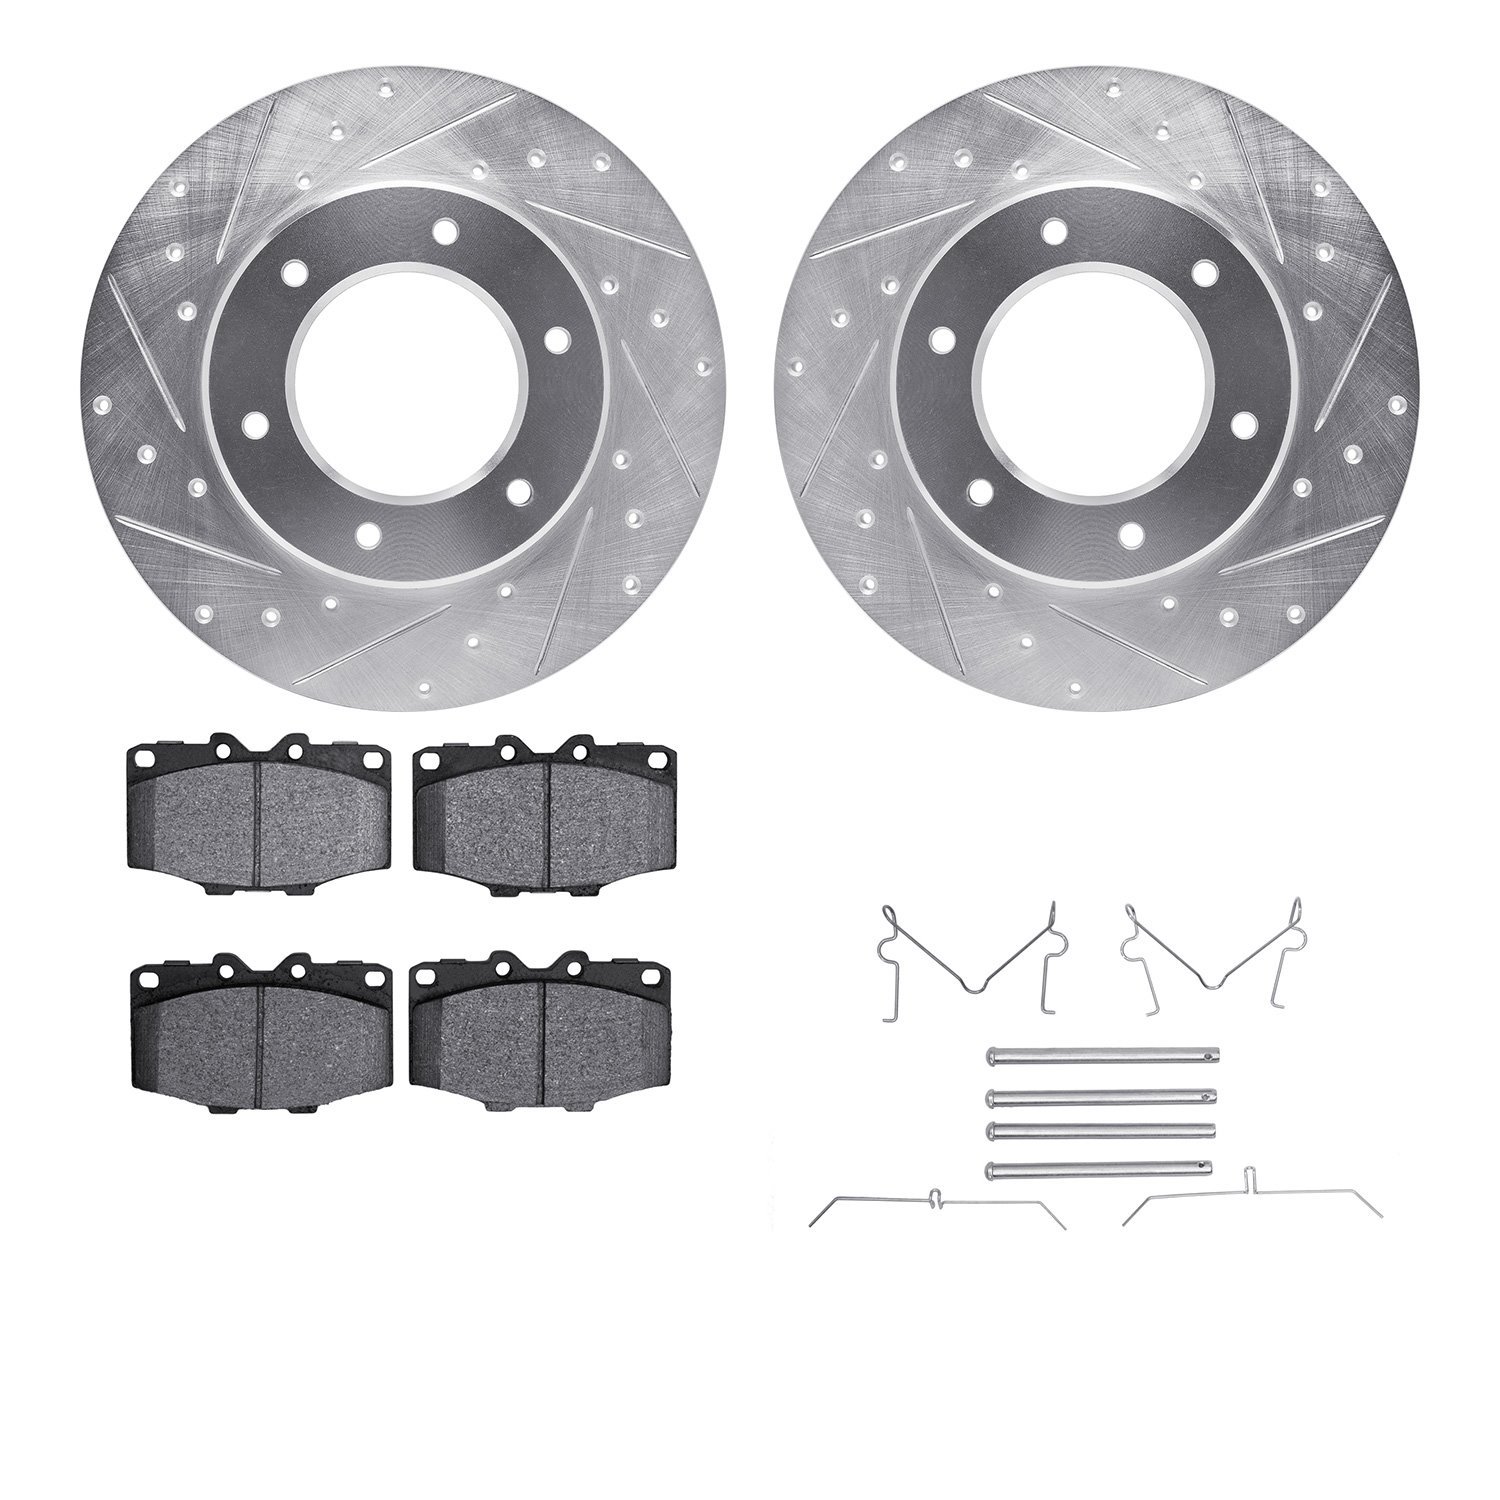 7412-76002 Drilled/Slotted Brake Rotors with Ultimate-Duty Brake Pads Kit & Hardware [Silver], 1979-1980 Lexus/Toyota/Scion, Pos